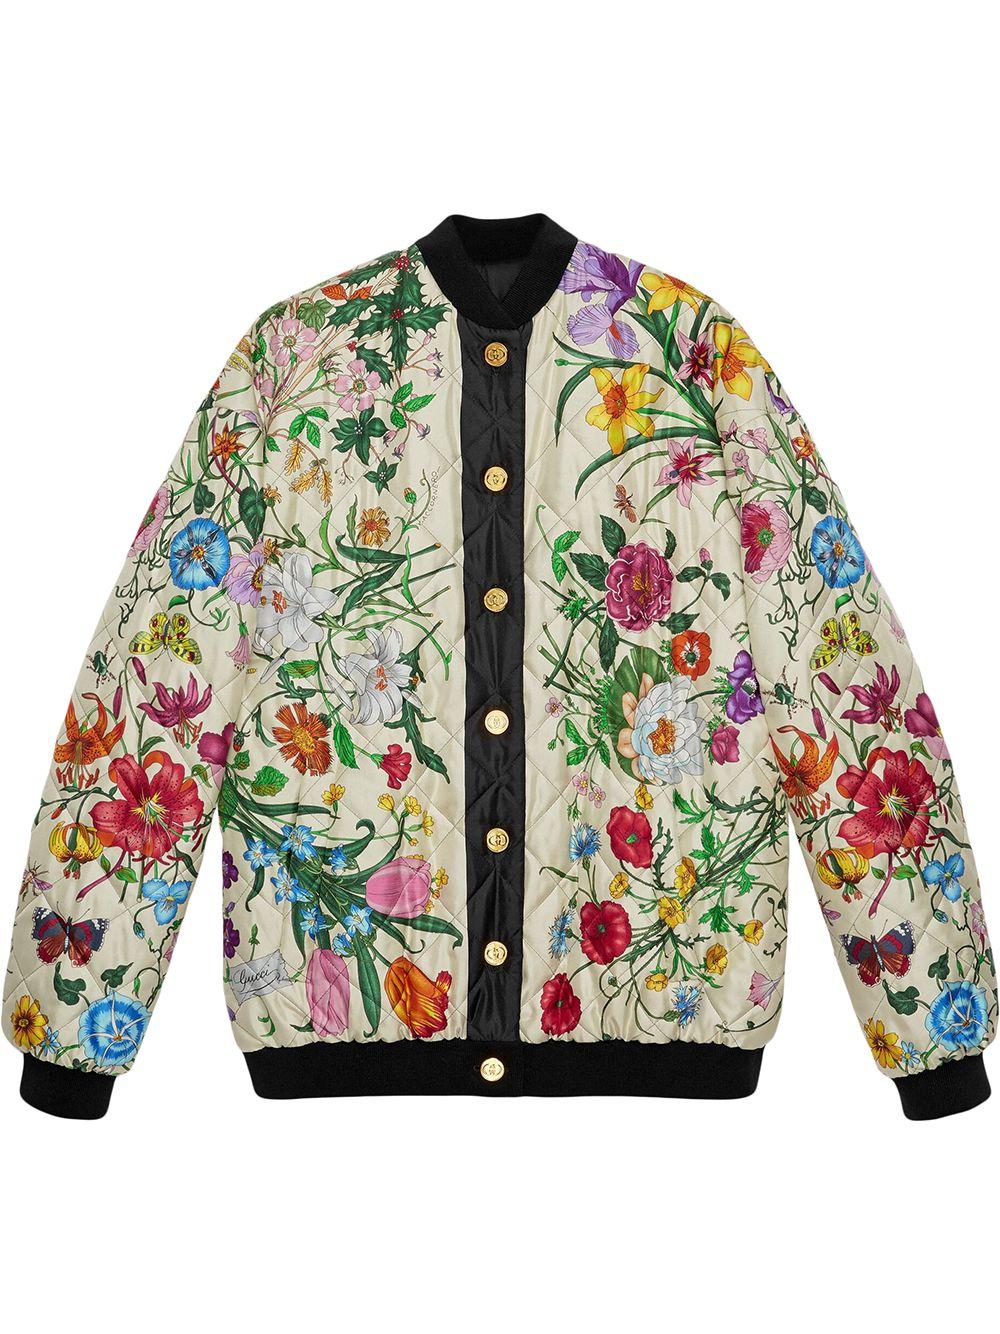 Gucci Disney X Reversible Bomber Jacket in White | Lyst